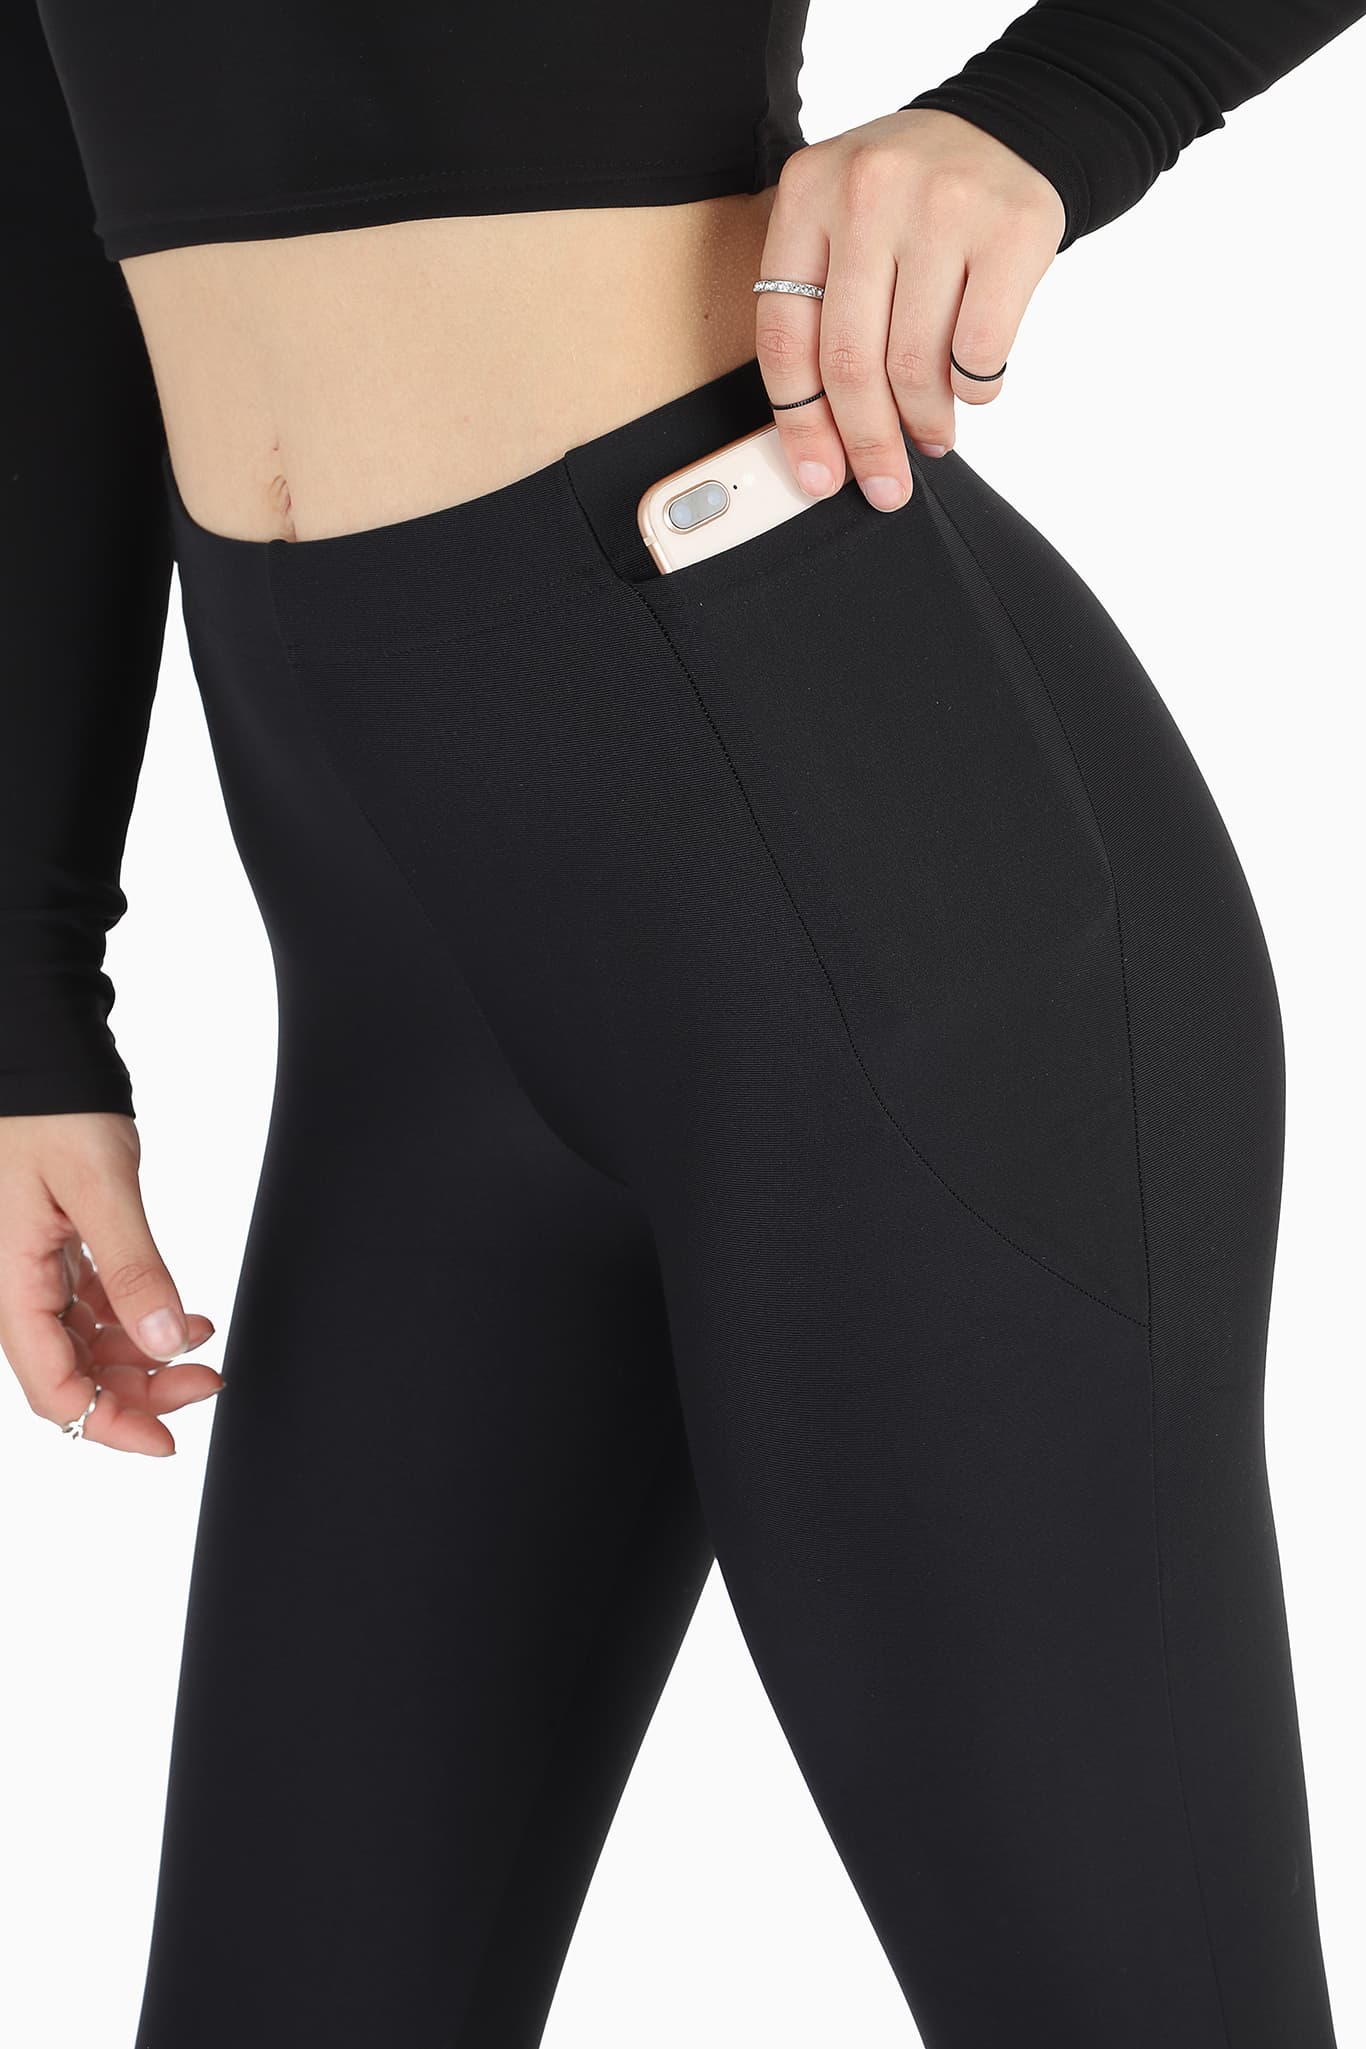 BLINKIN Gym wear Mesh Leggings Workout Pants with Side Pockets/Stretchable  Tights/Highwaist Sports Fitness Yoga Track Pants for Women & Girls_2012  (Color_Black,Size_S) : Amazon.in: Fashion